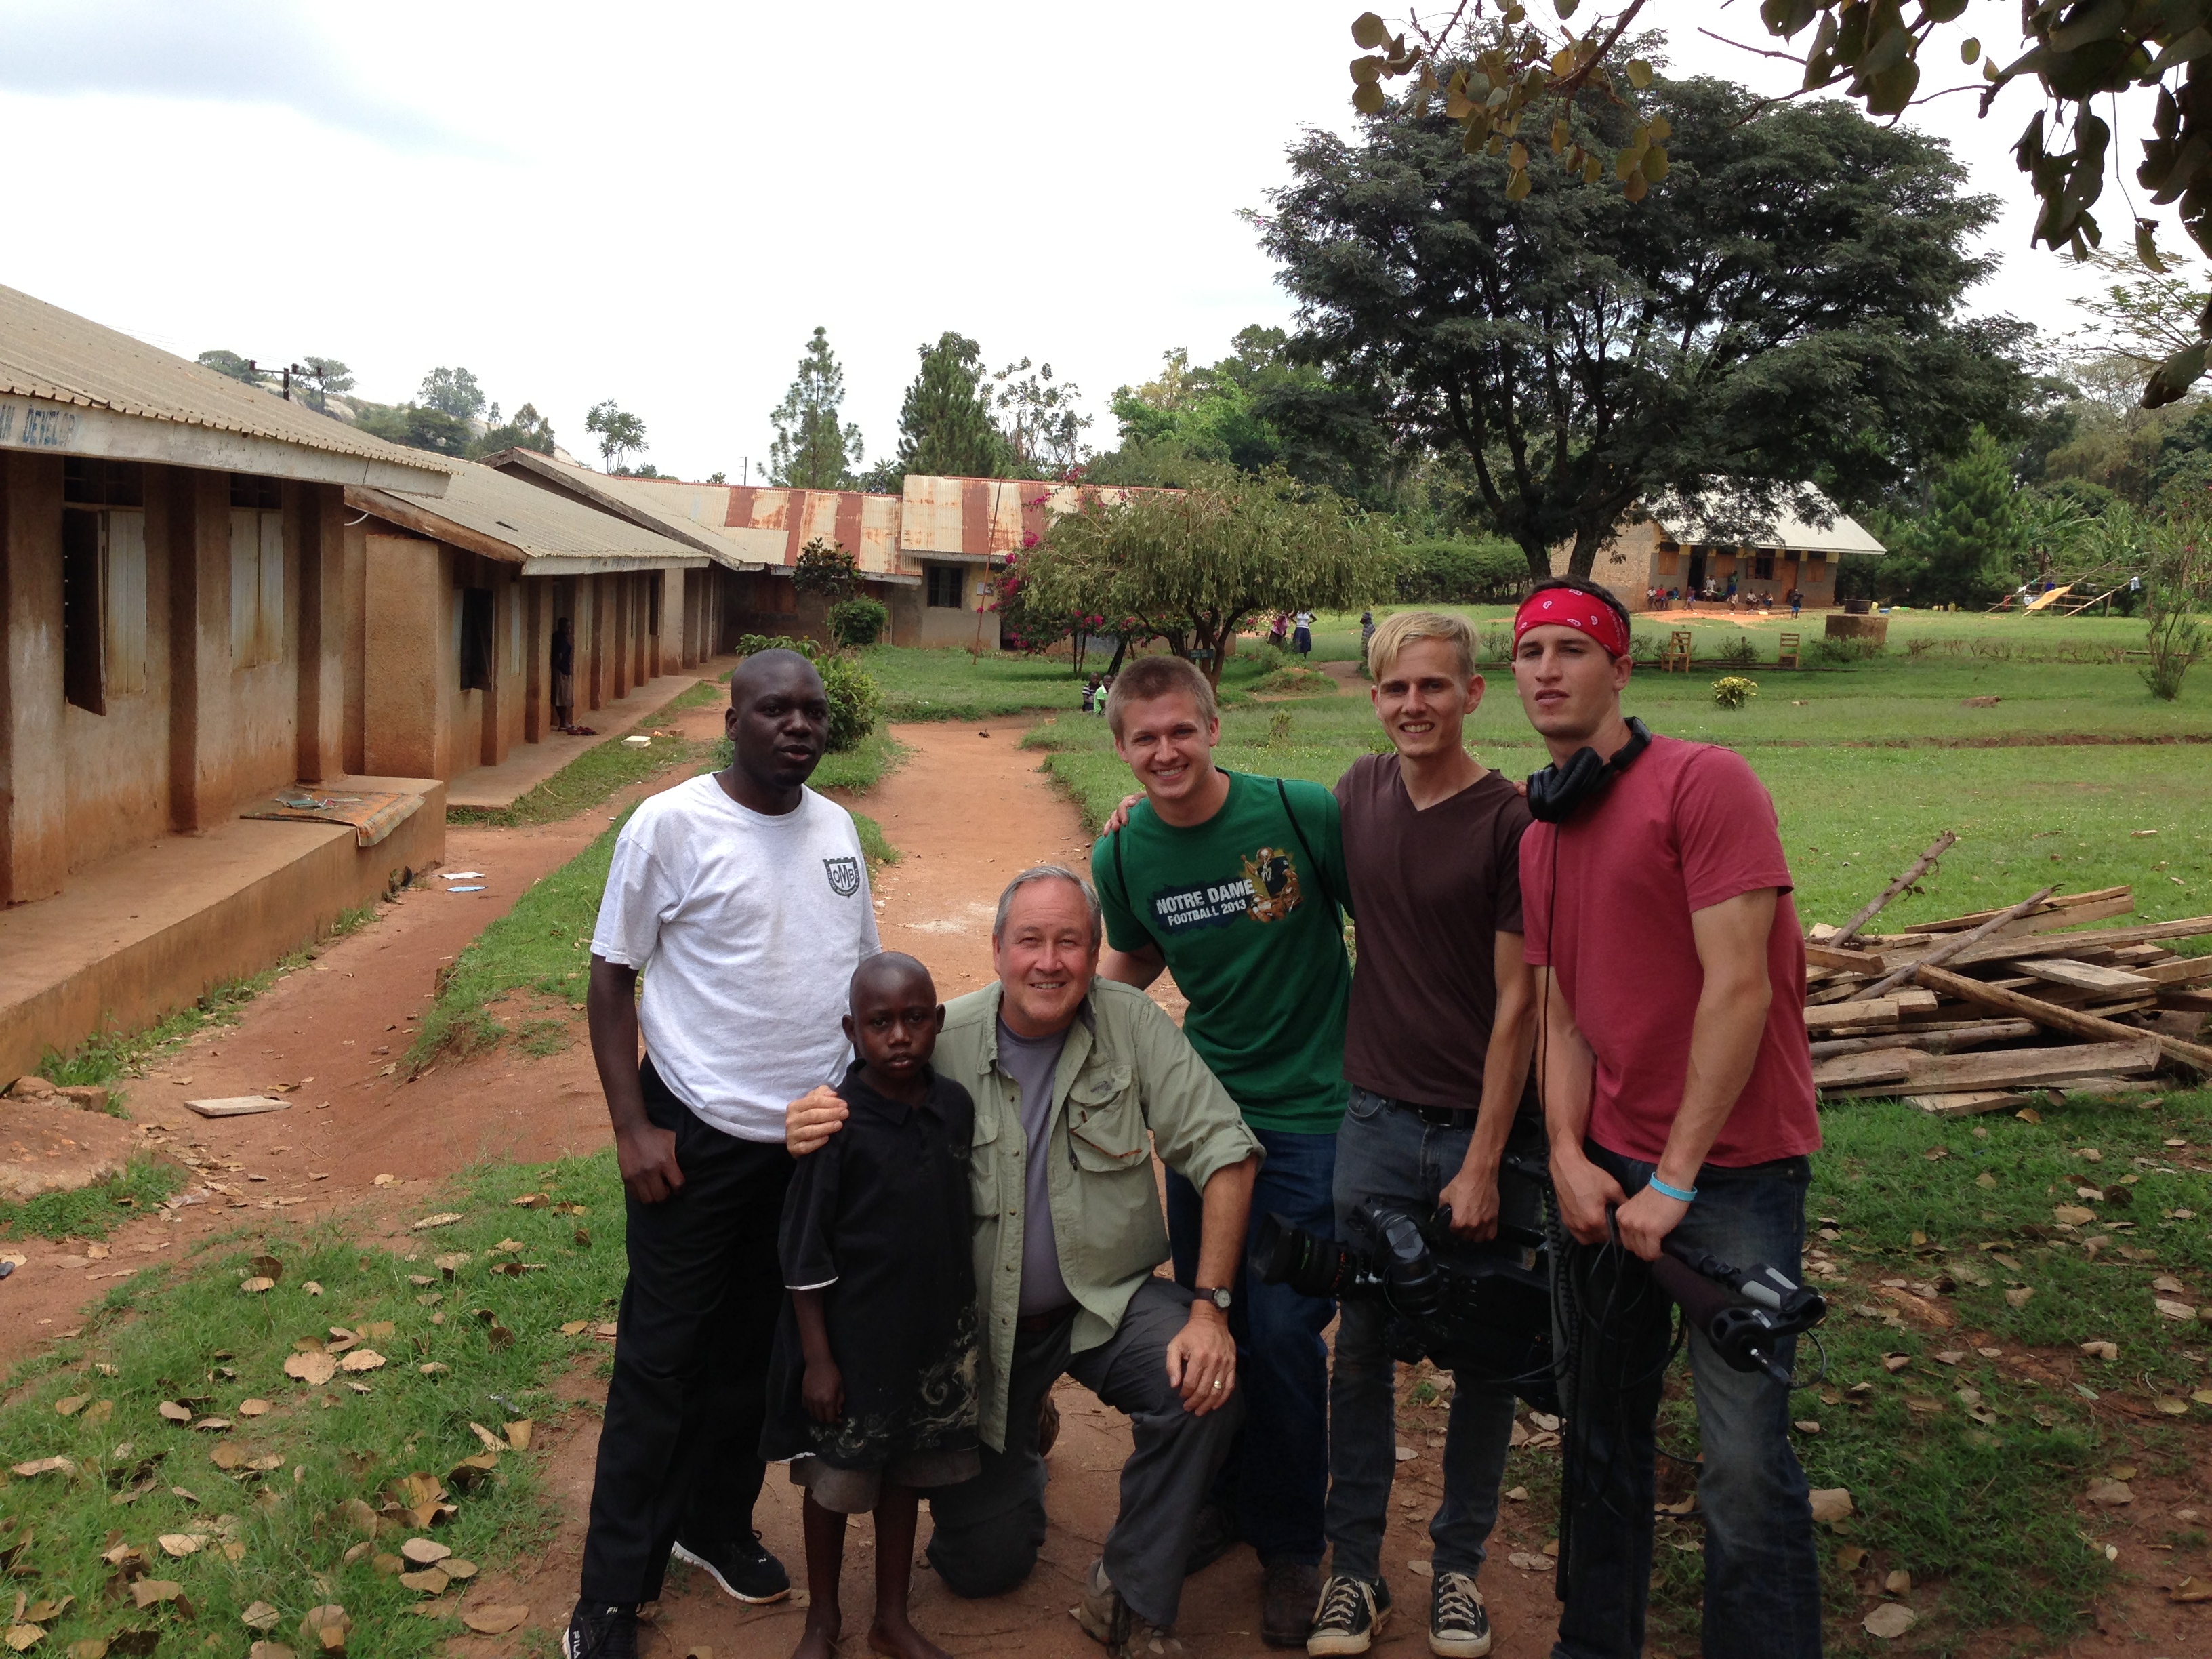 Road to Hope film crew posing with our leading documentary film character, George, at his school in Kakumiro, Uganda.